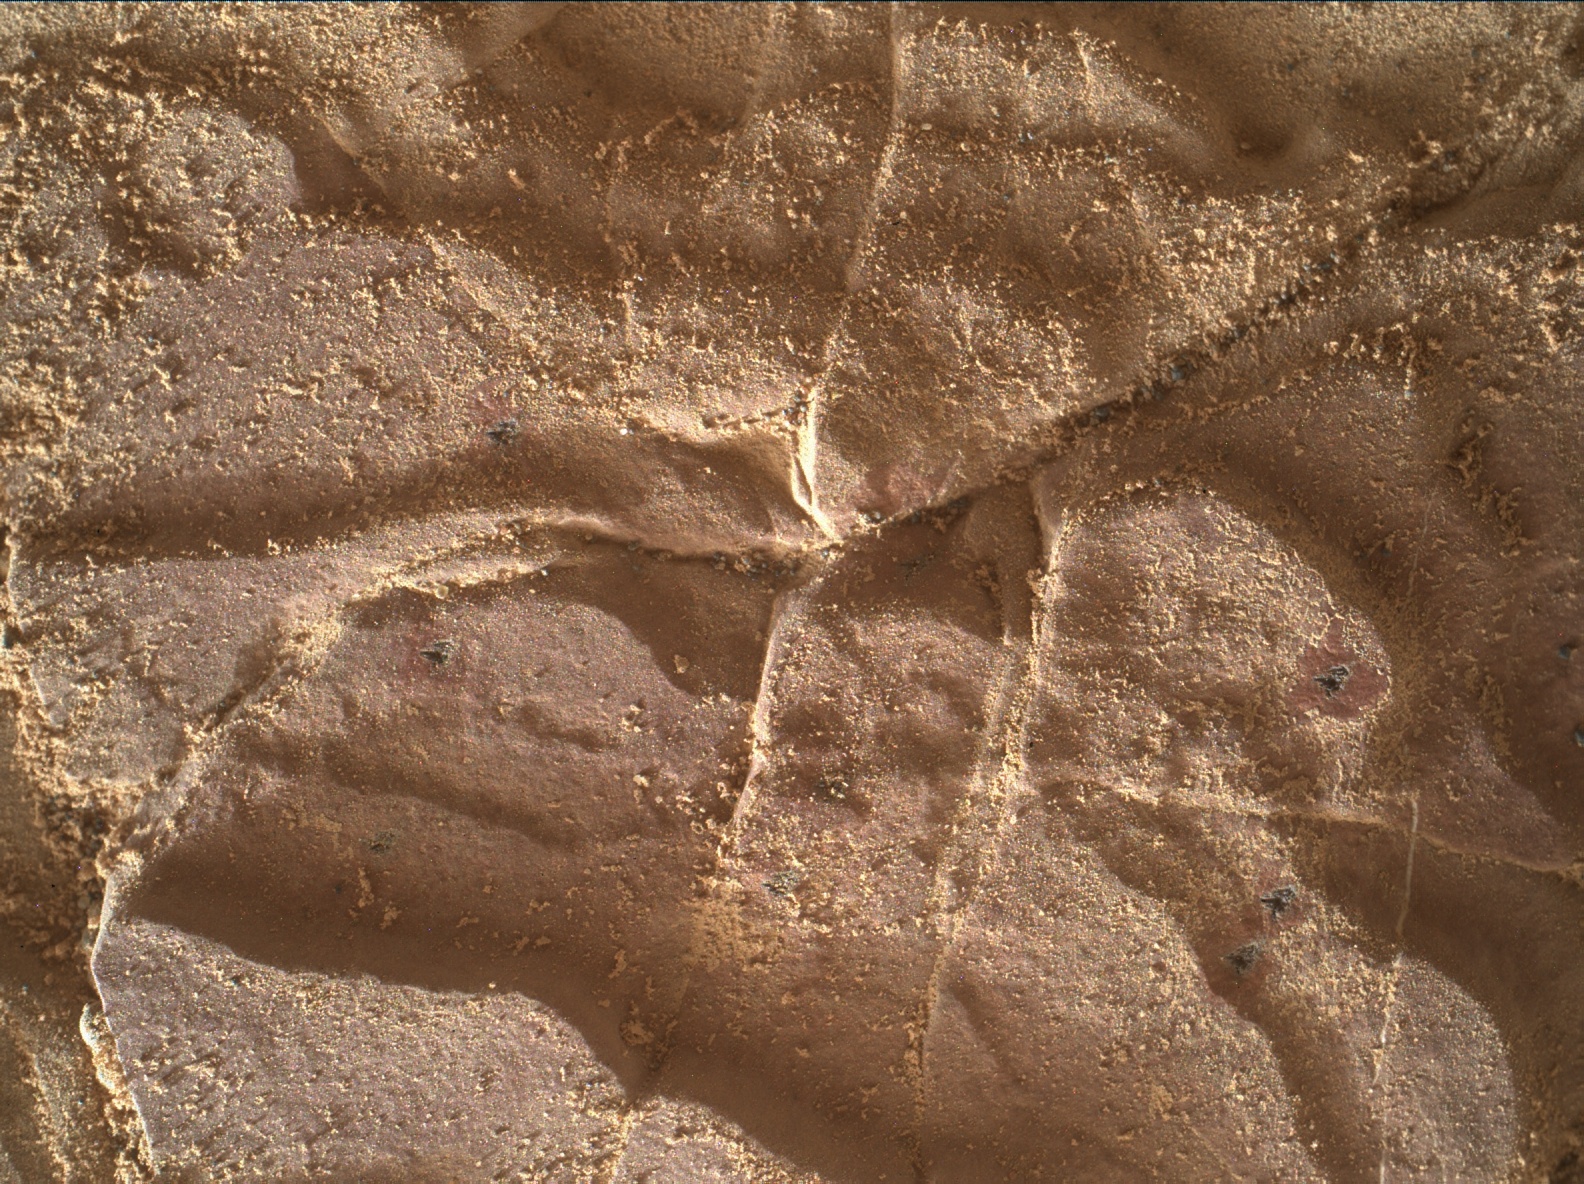 Nasa's Mars rover Curiosity acquired this image using its Mars Hand Lens Imager (MAHLI) on Sol 2038